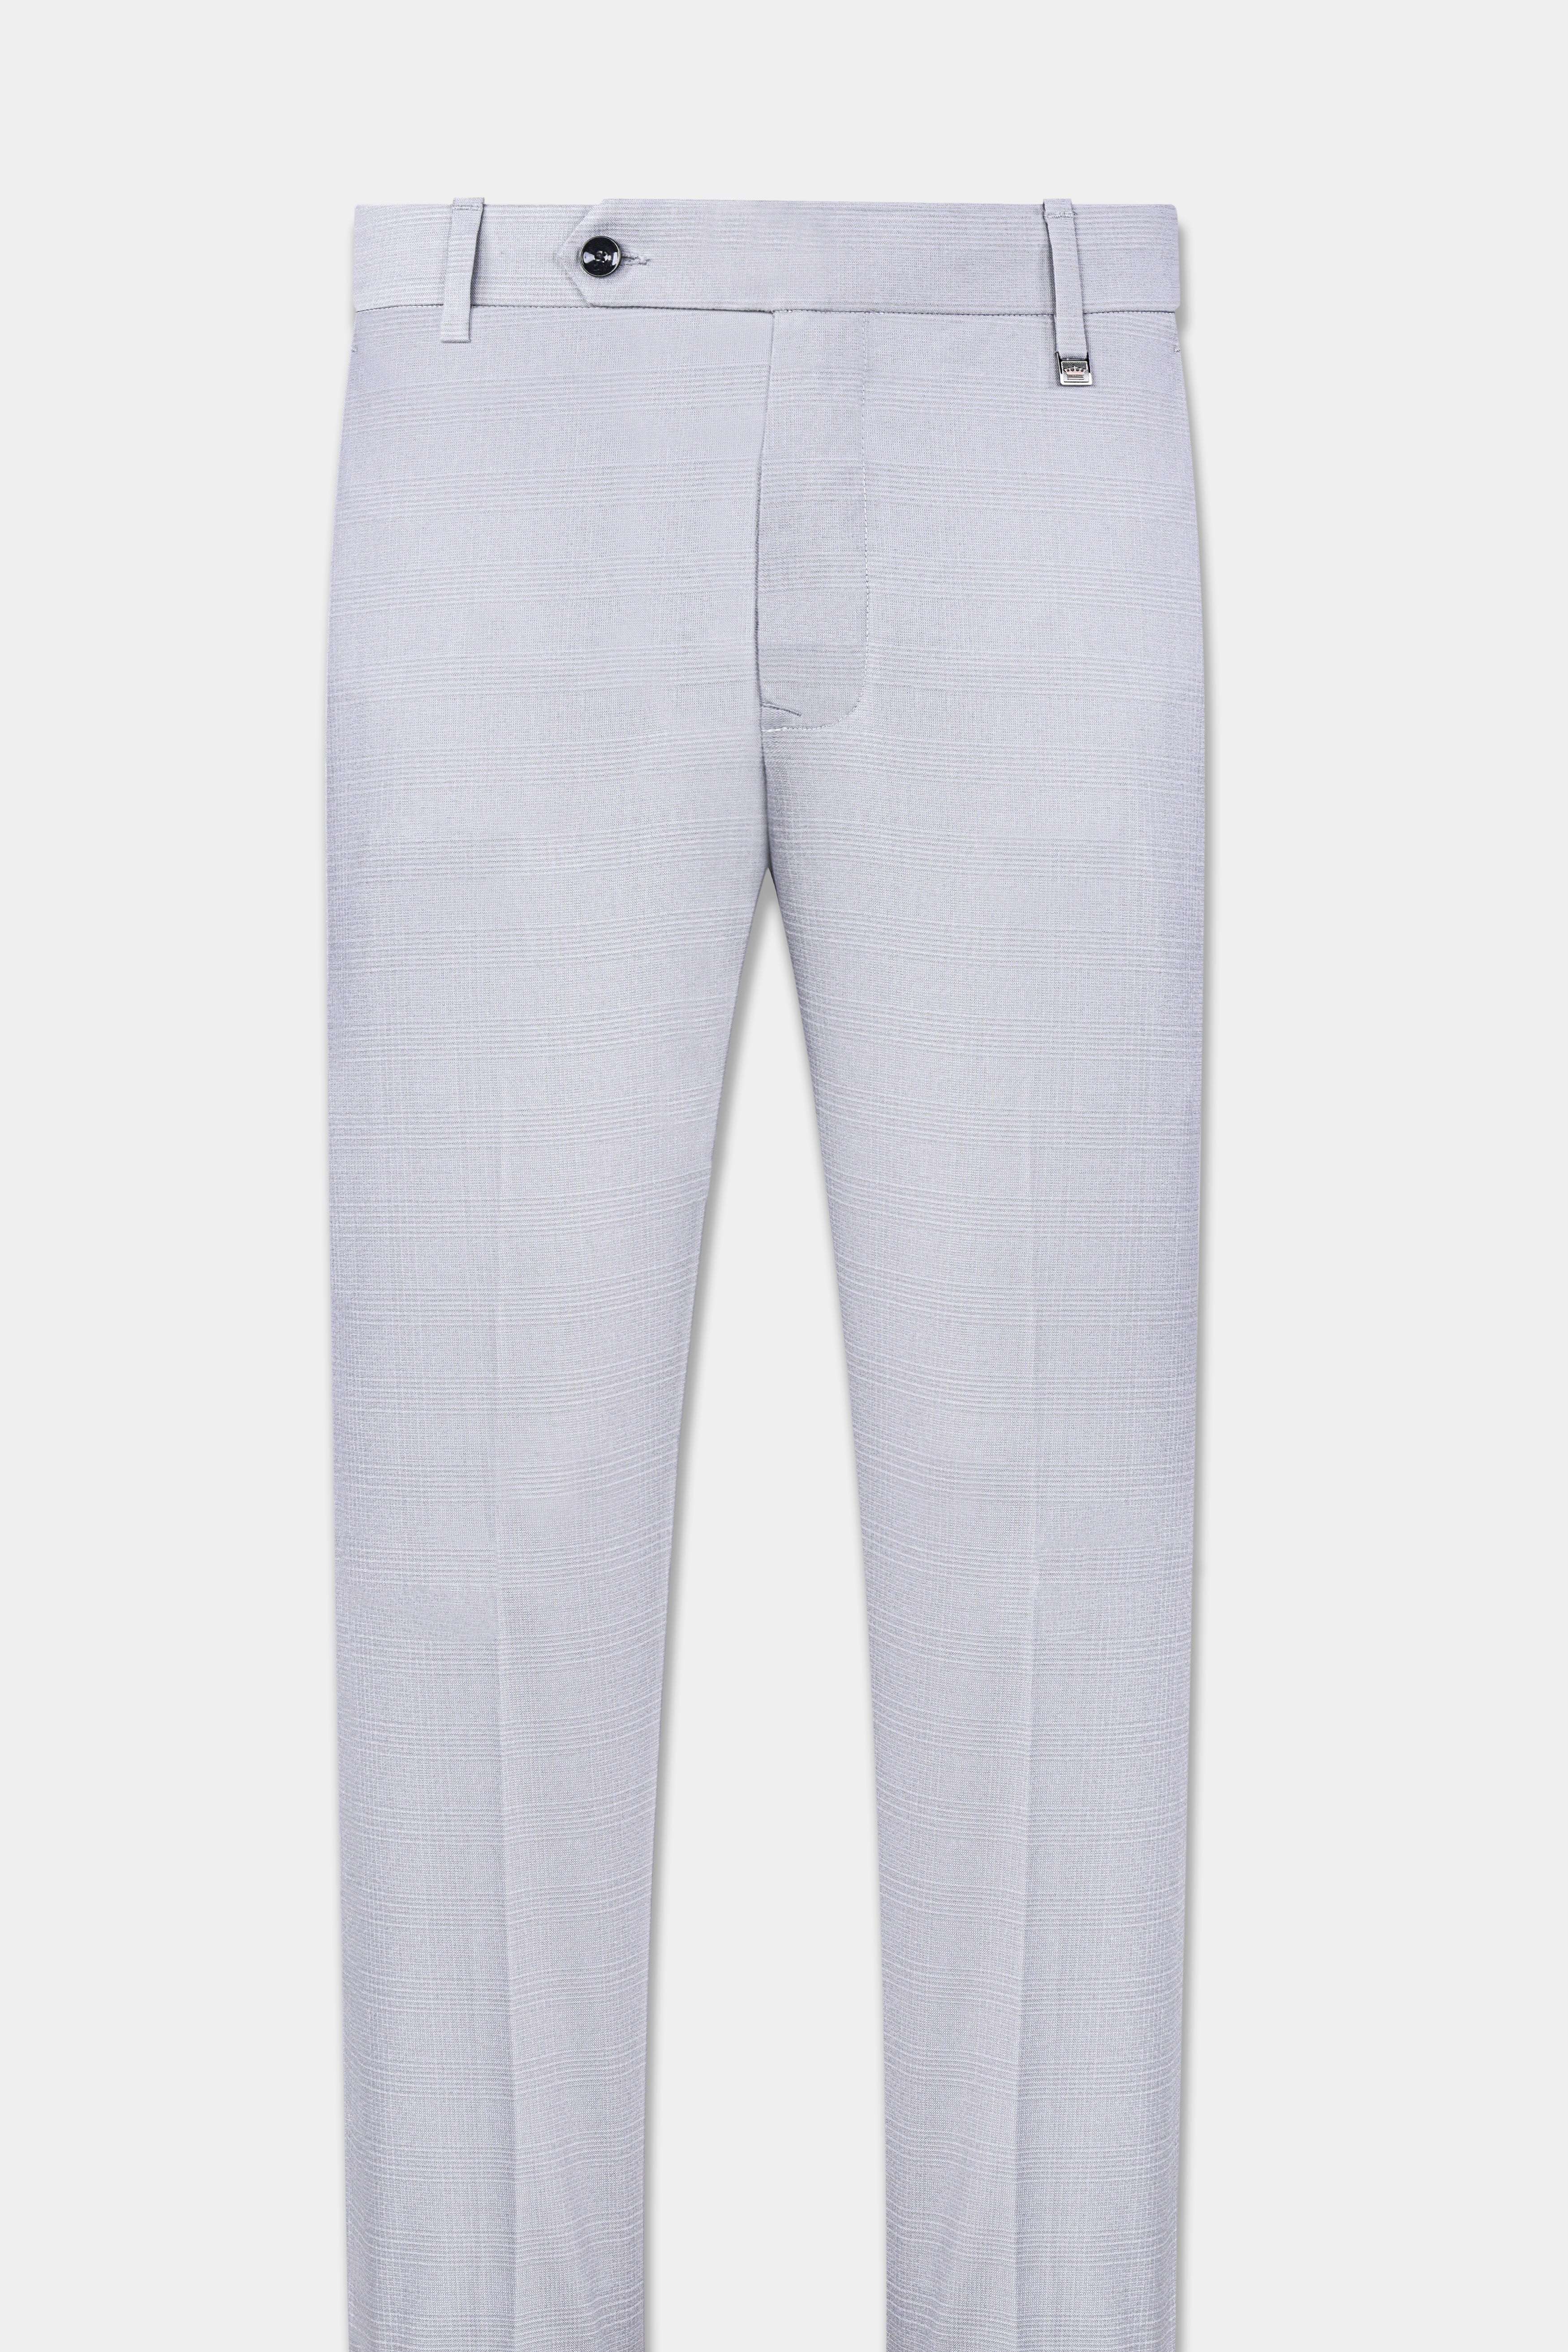 Seed Gray Wool Rich Pant